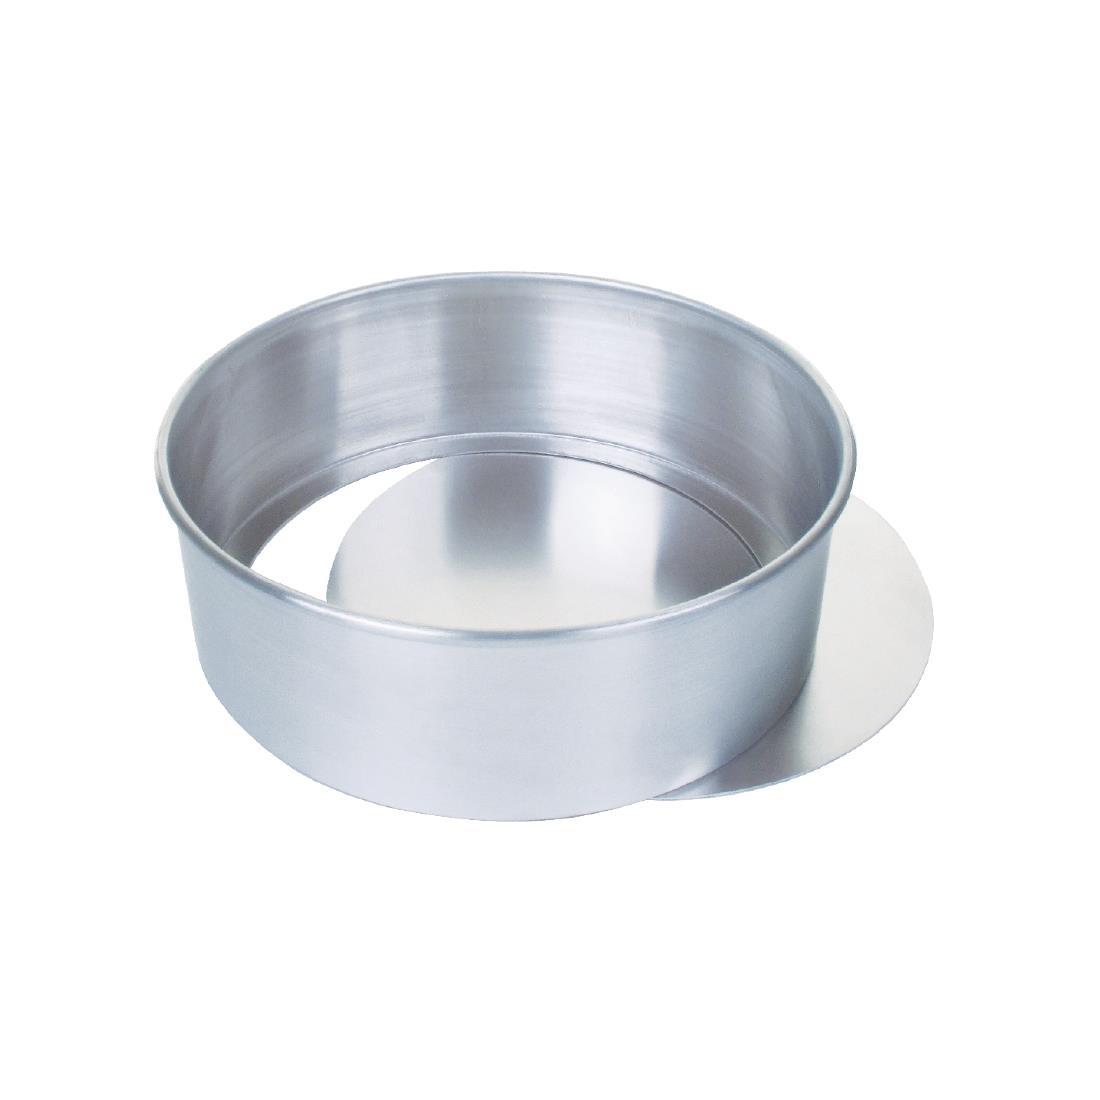 Aluminium Cake Tin With Removable Base 200mm - CD479  - 1